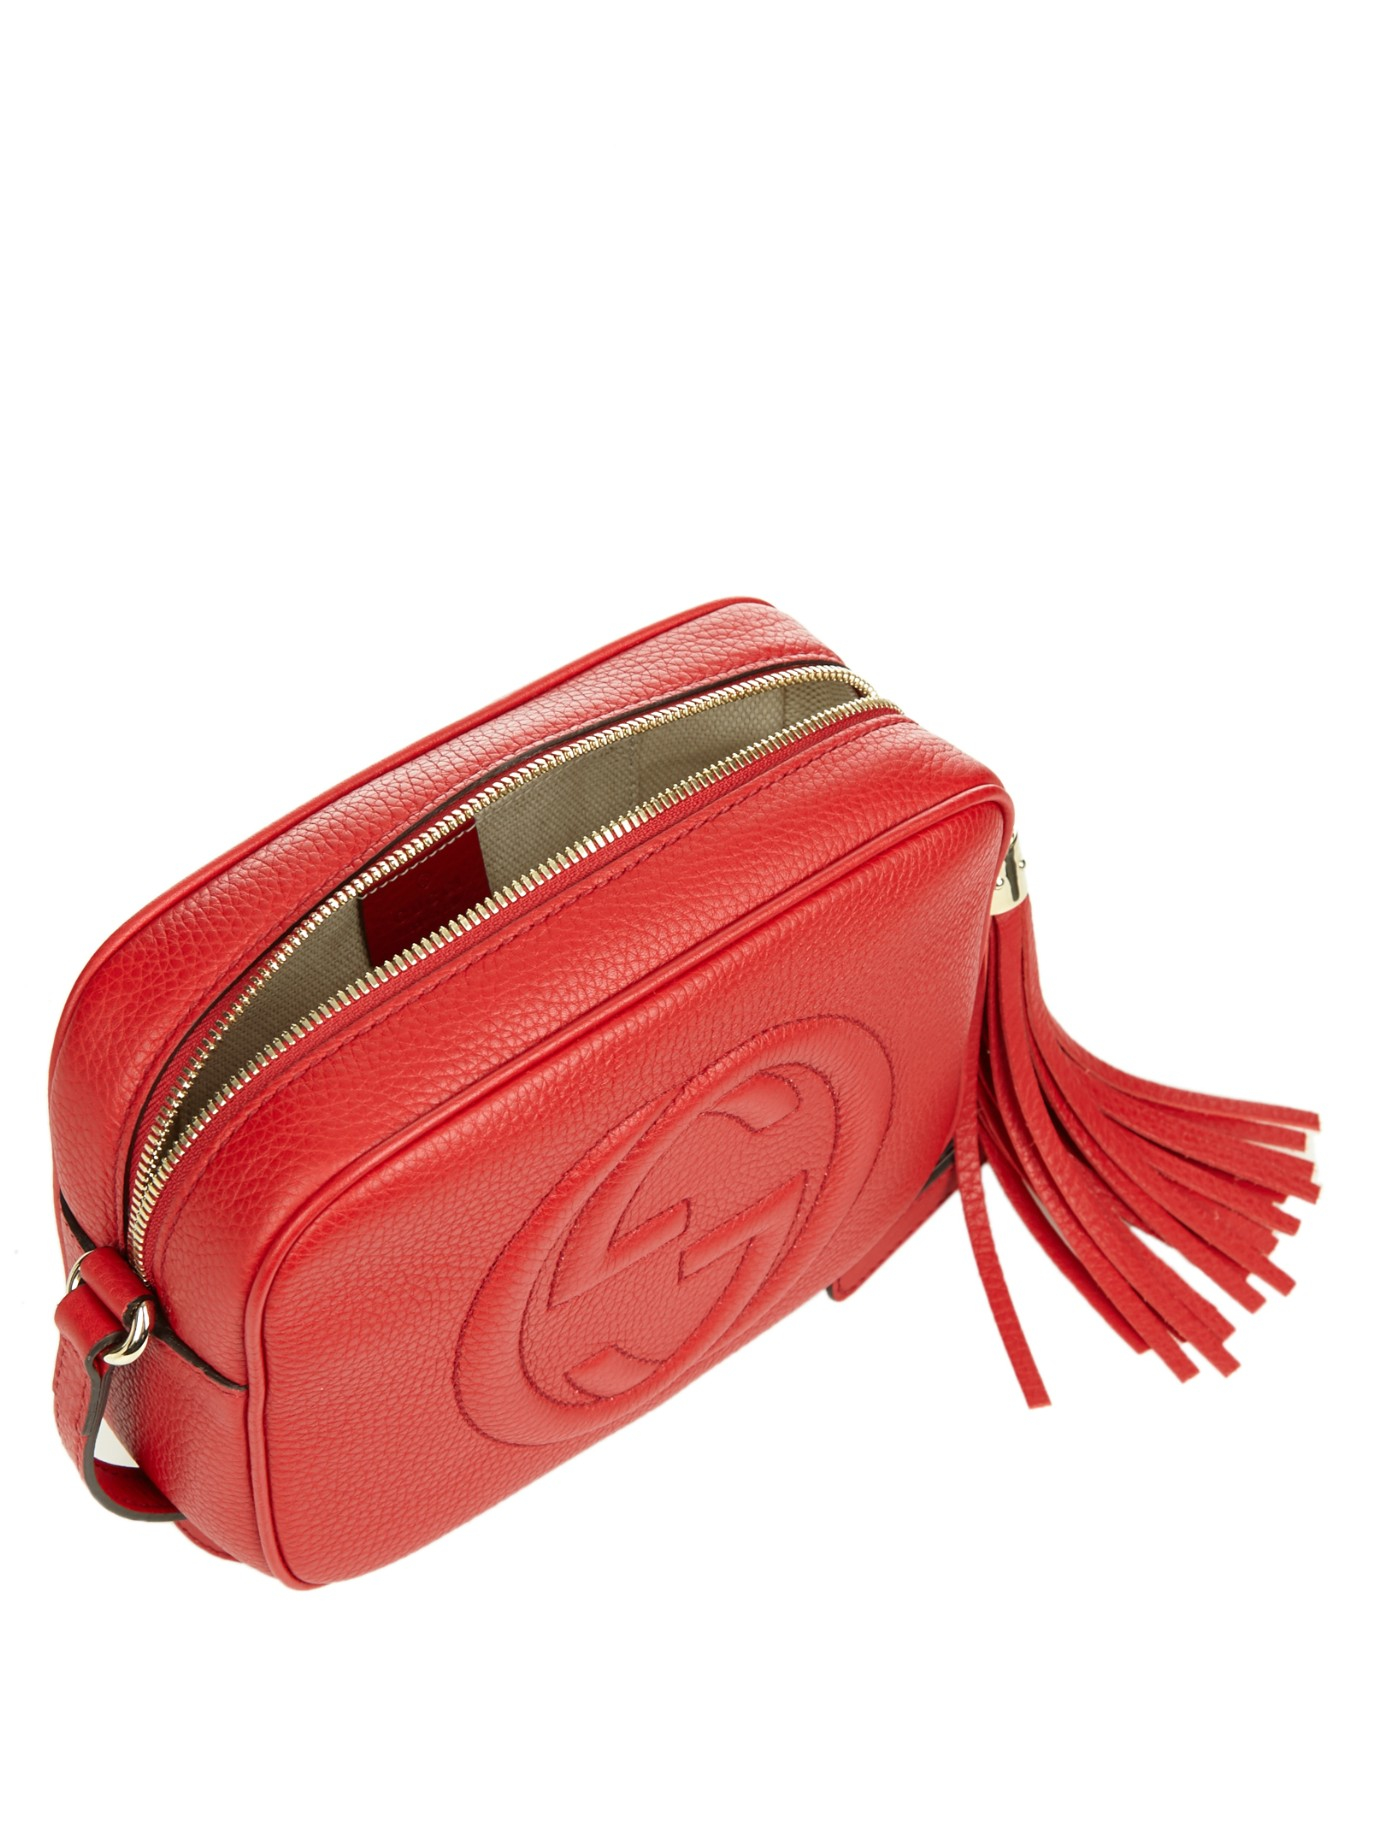 Gucci Soho Grained-Leather Cross-Body Bag in Red